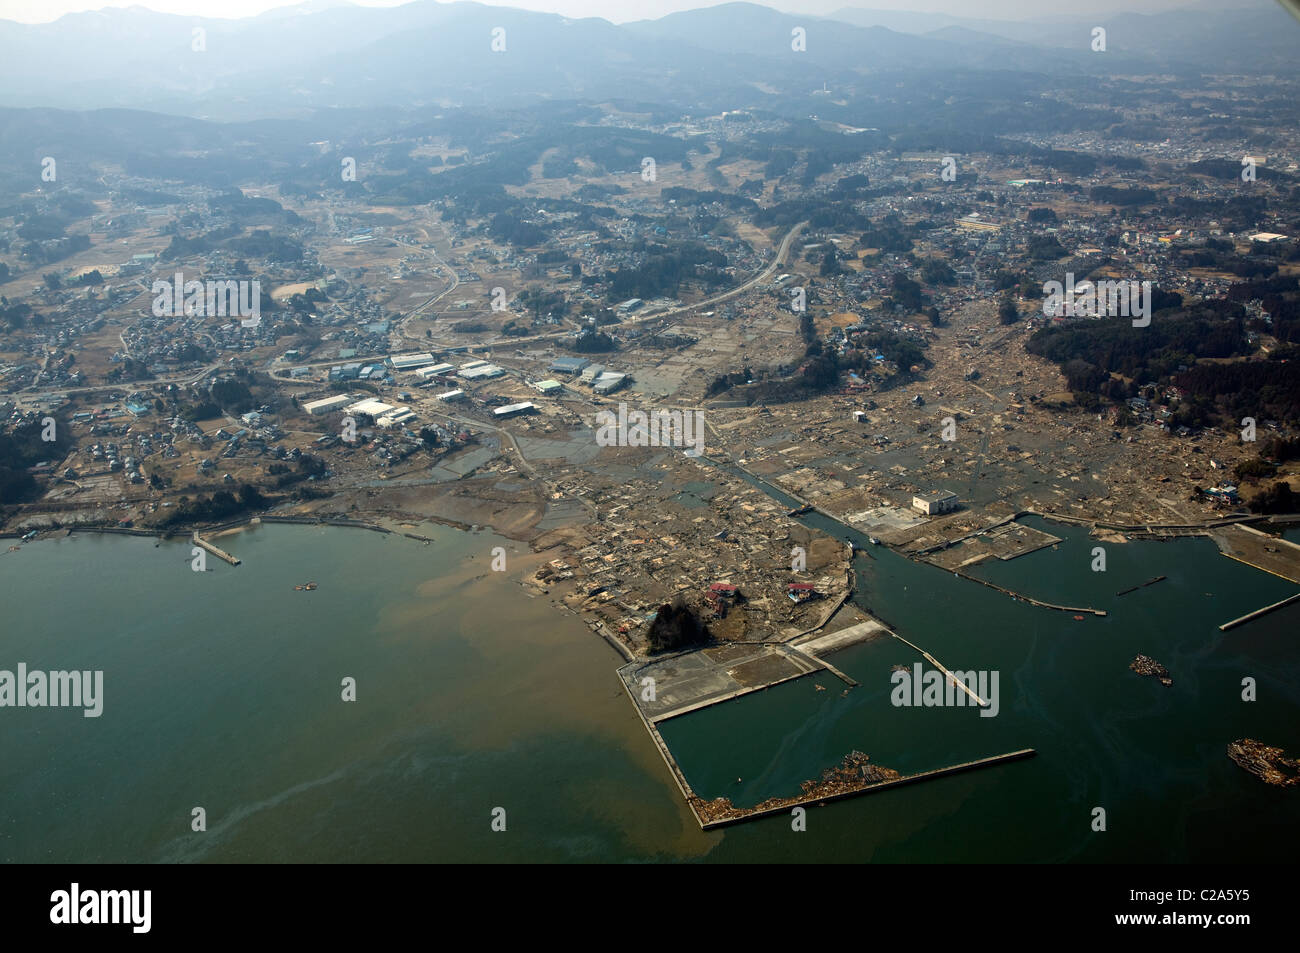 Aerial view of damage to Kesennuma, Miyagi Prefecture after a 9. 0 magnitude earthquake and subsequent tsunami devastated the Stock Photo